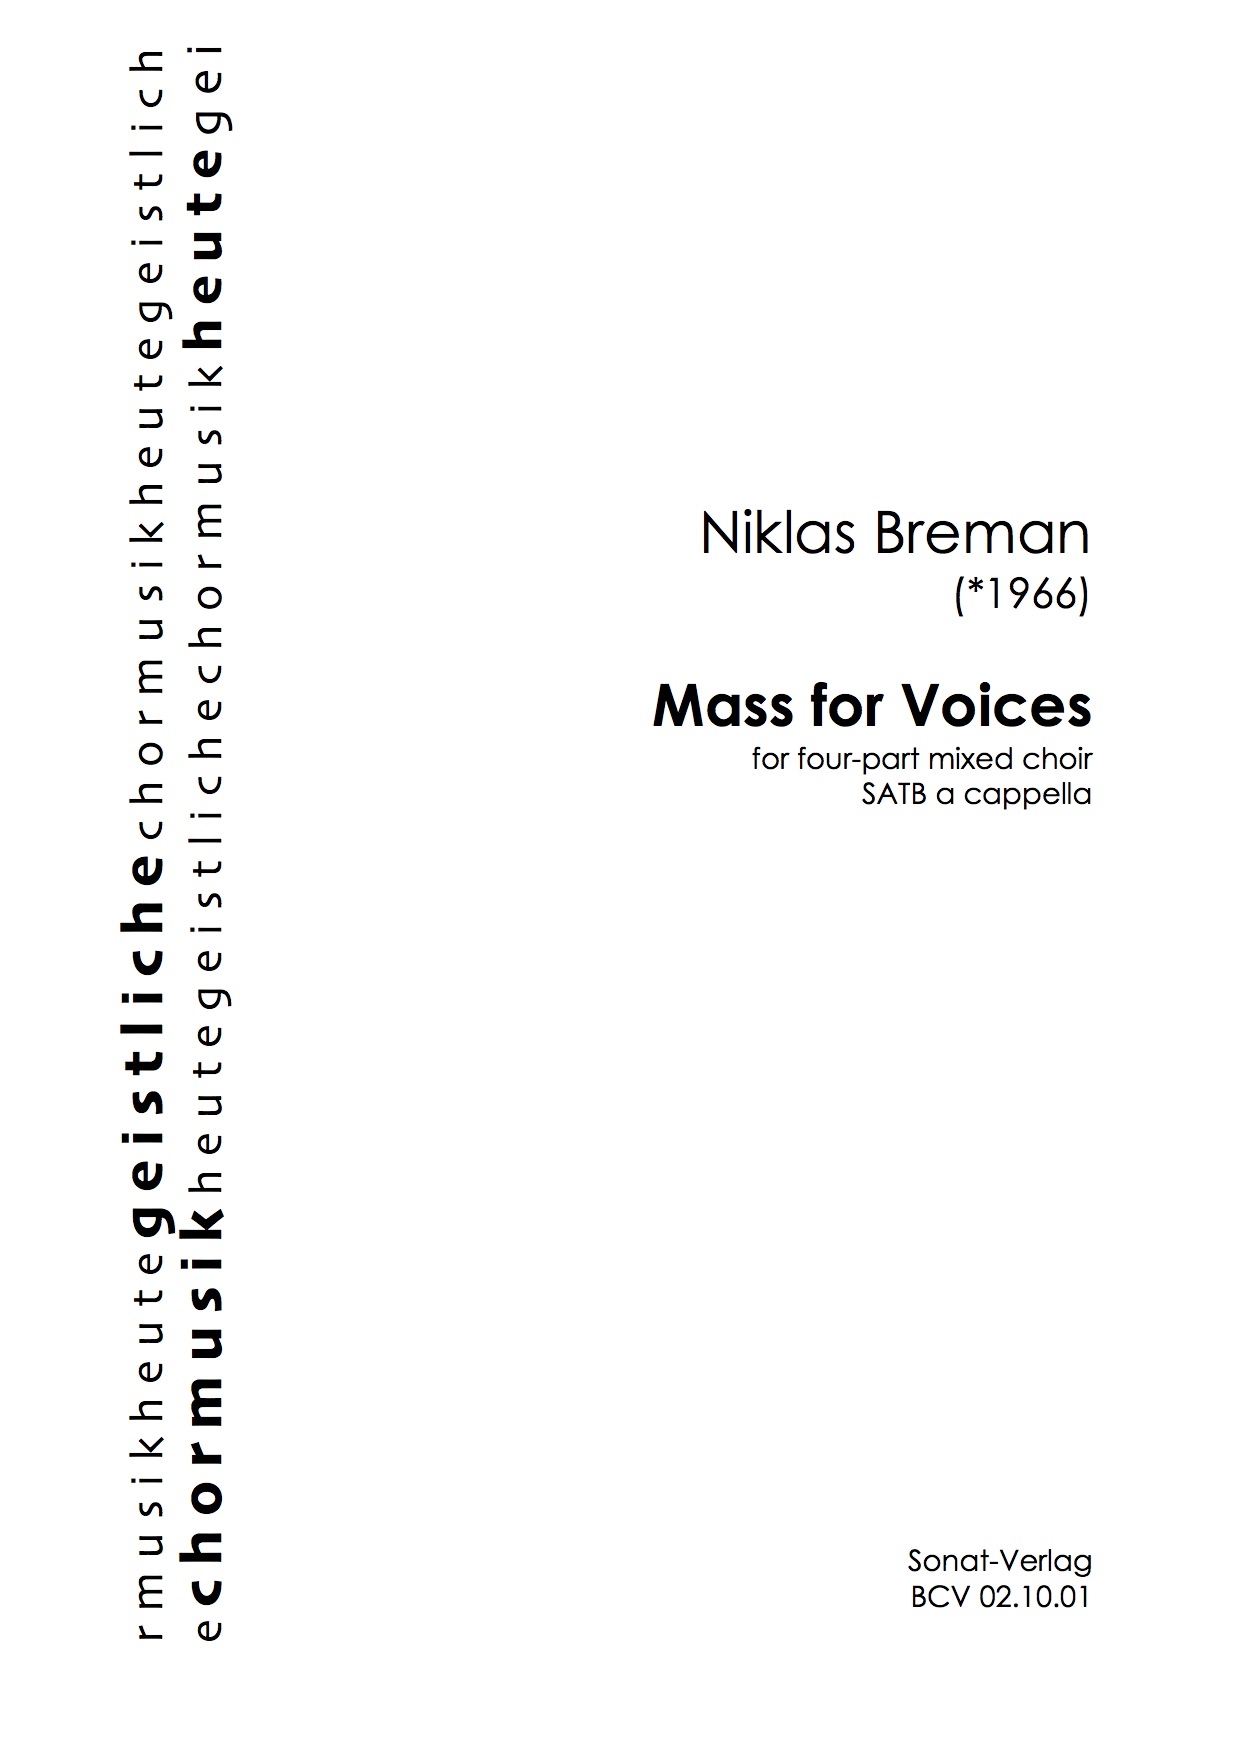 Mass for Voices